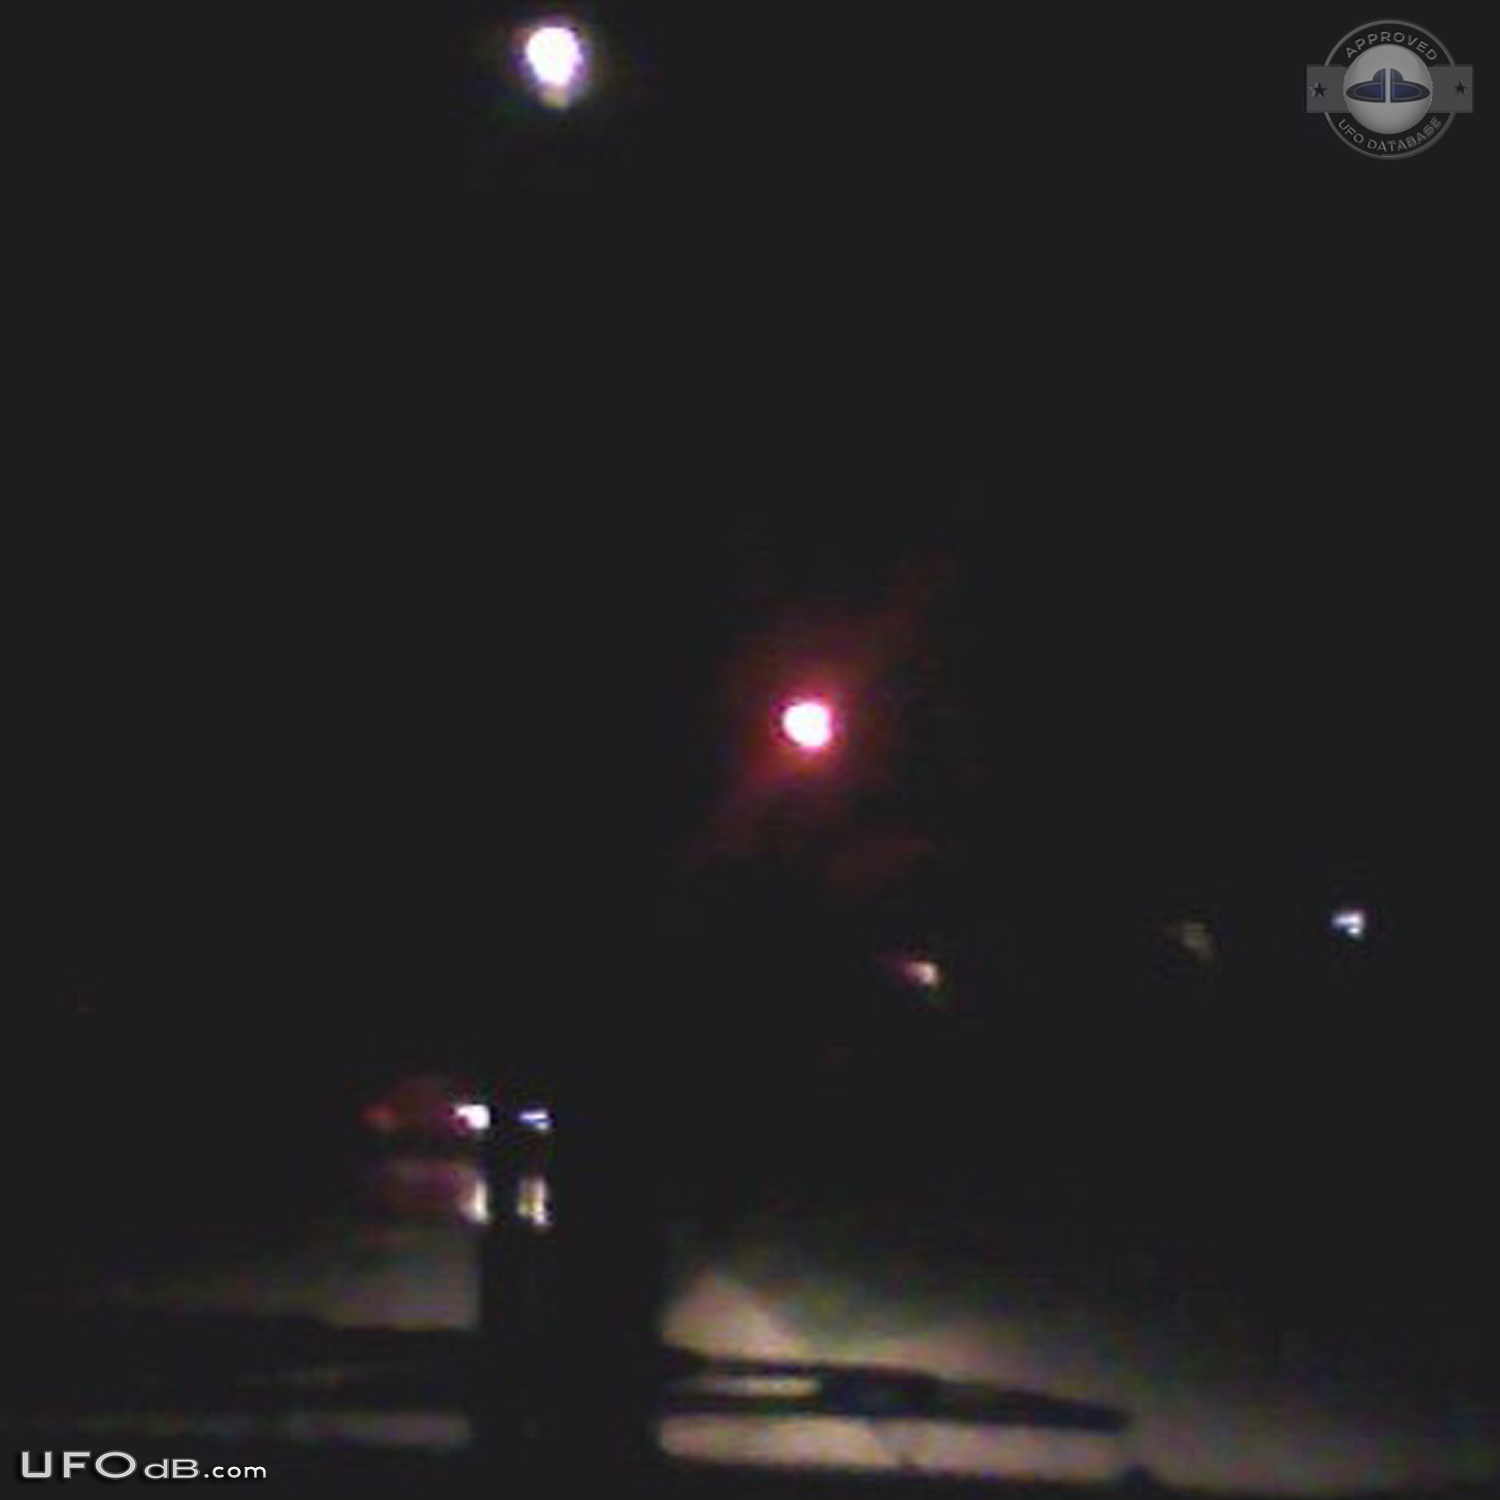 Bright glowing hovering sphere UFO over St Louis Missouri - 2014 UFO Picture #560-2